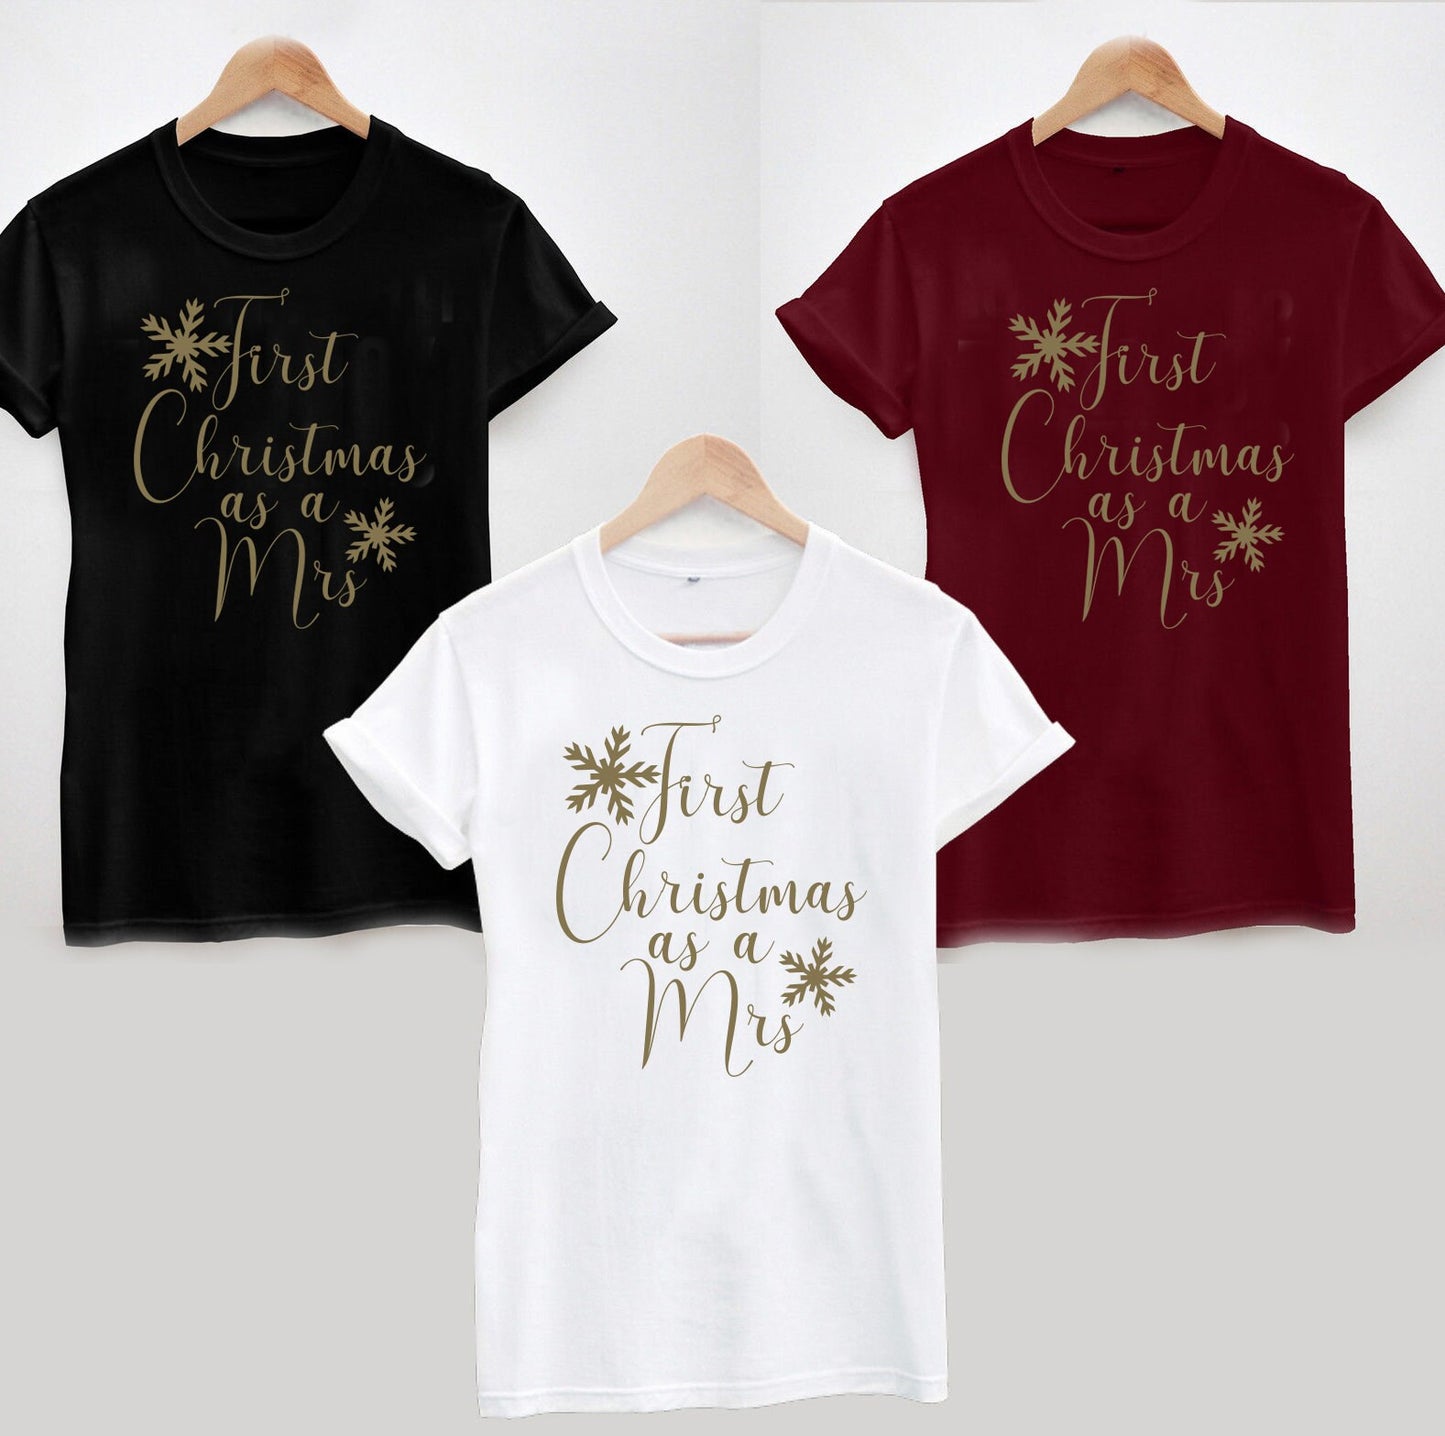 First Christmas as a Mrs T-shirt, Funny Xmas Wedding Gift